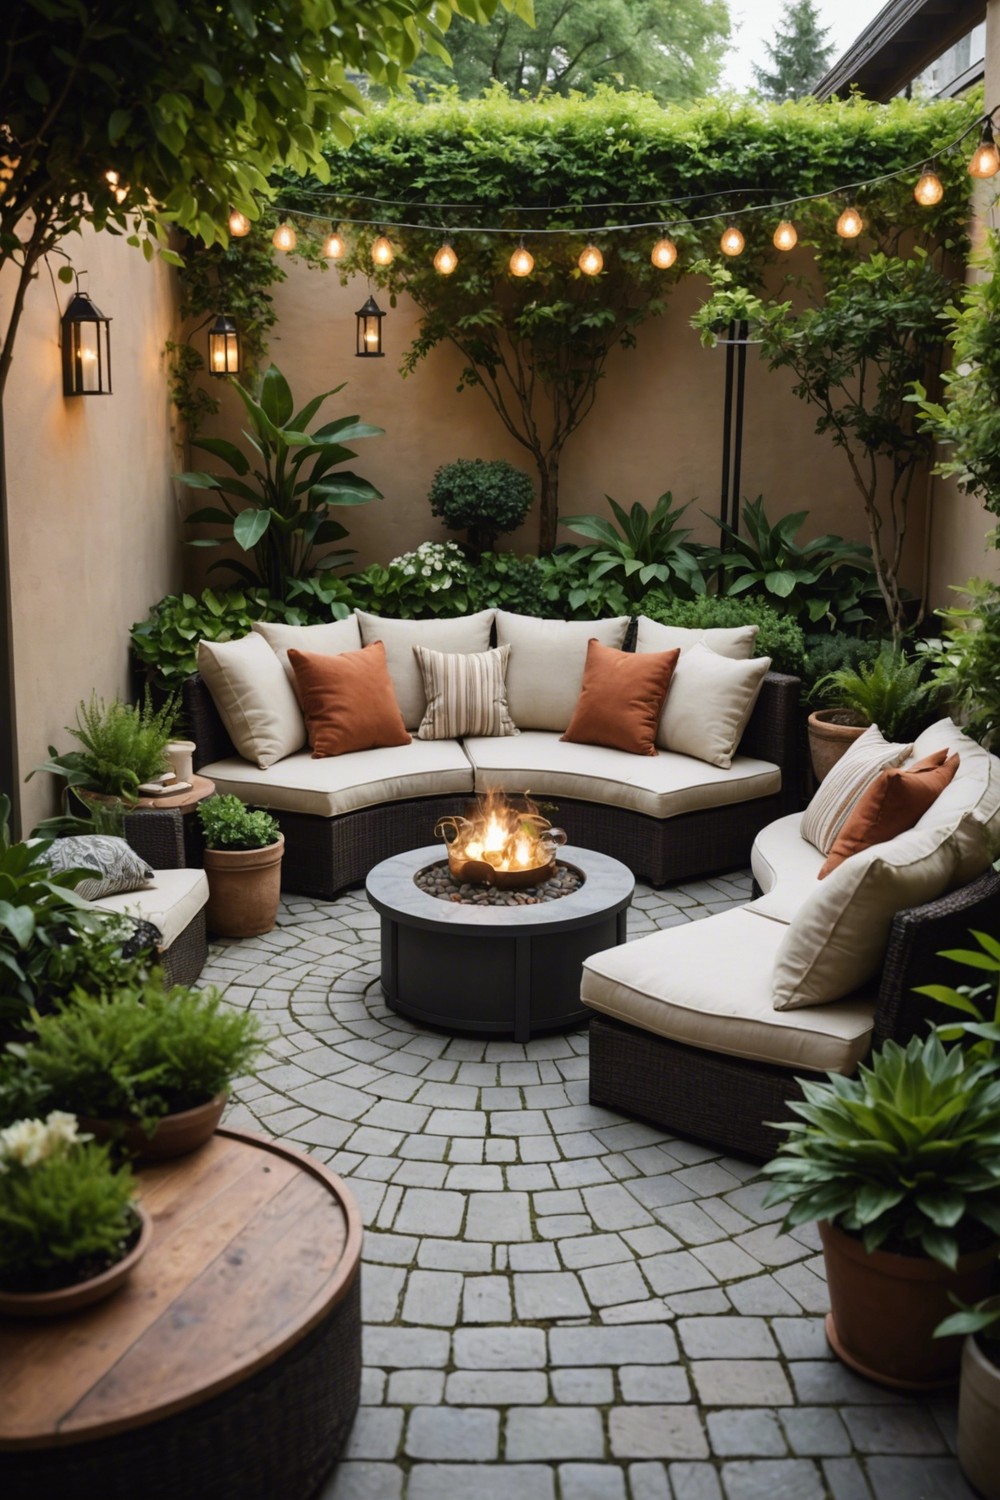 Cozy Patio Layout for an Intimate Setting